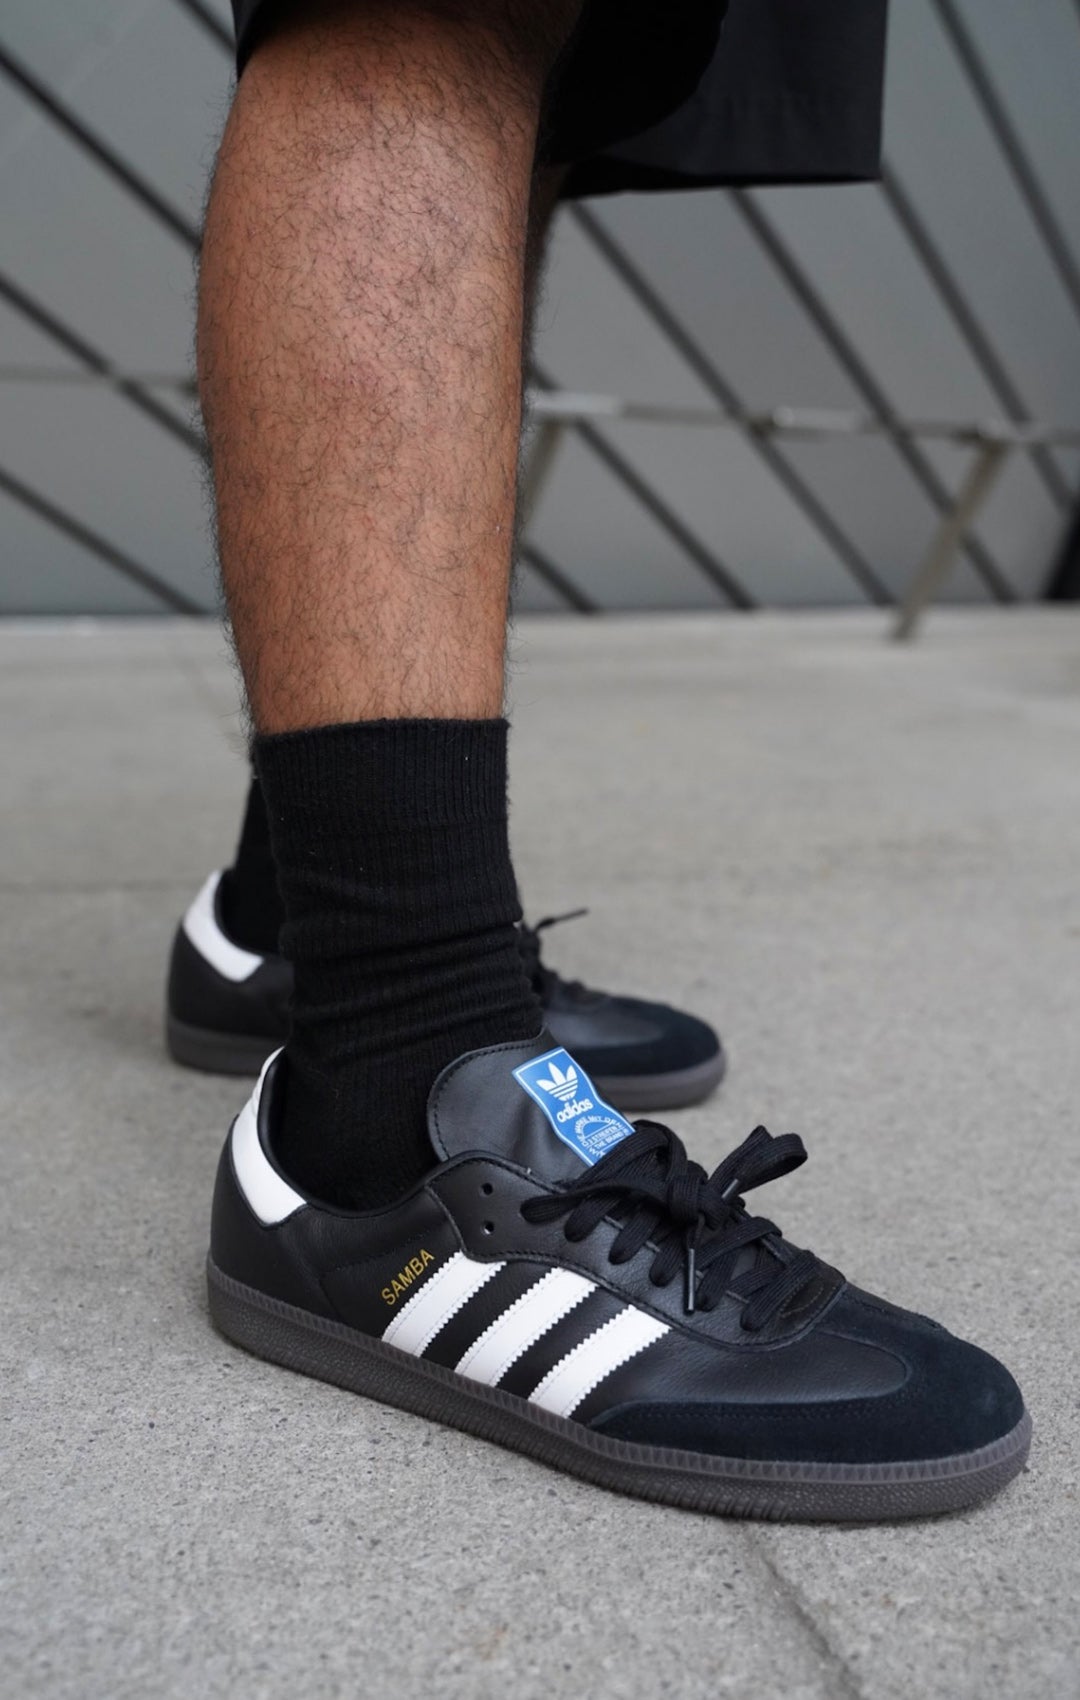 Behind the Brand: Foot Locker's Iconic Stripes